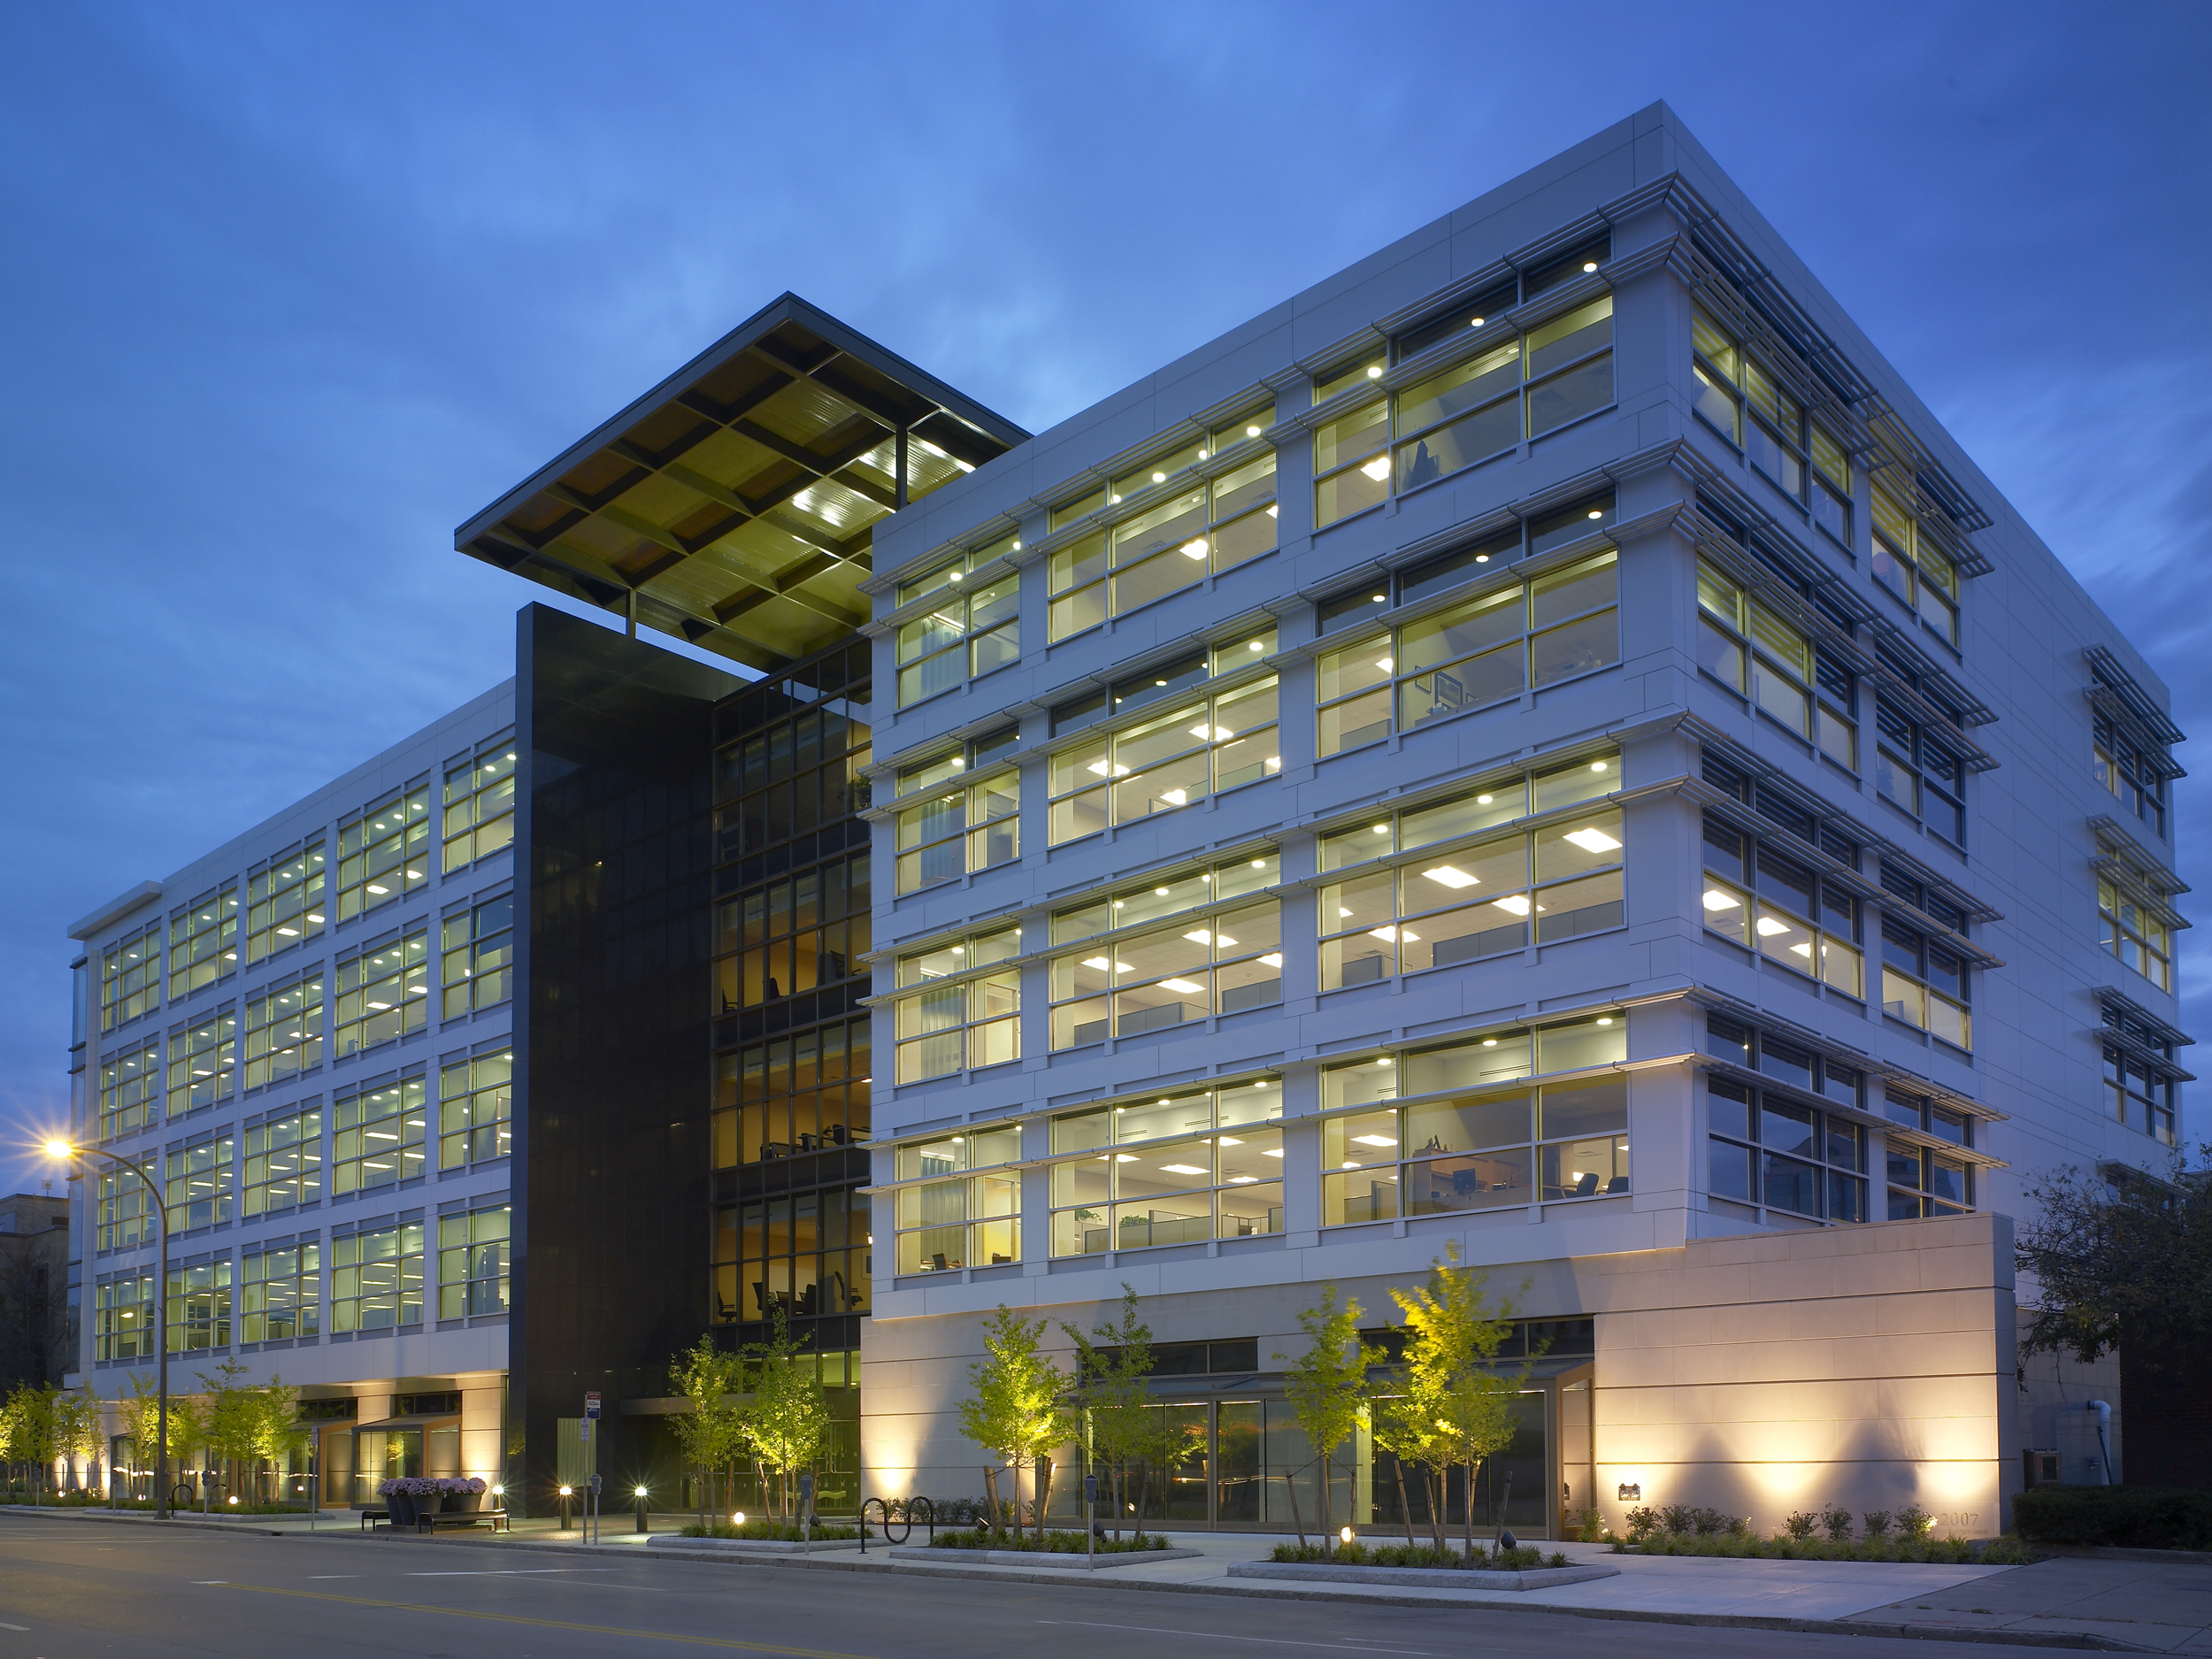 285 Delaware Office Building | HHL Architects